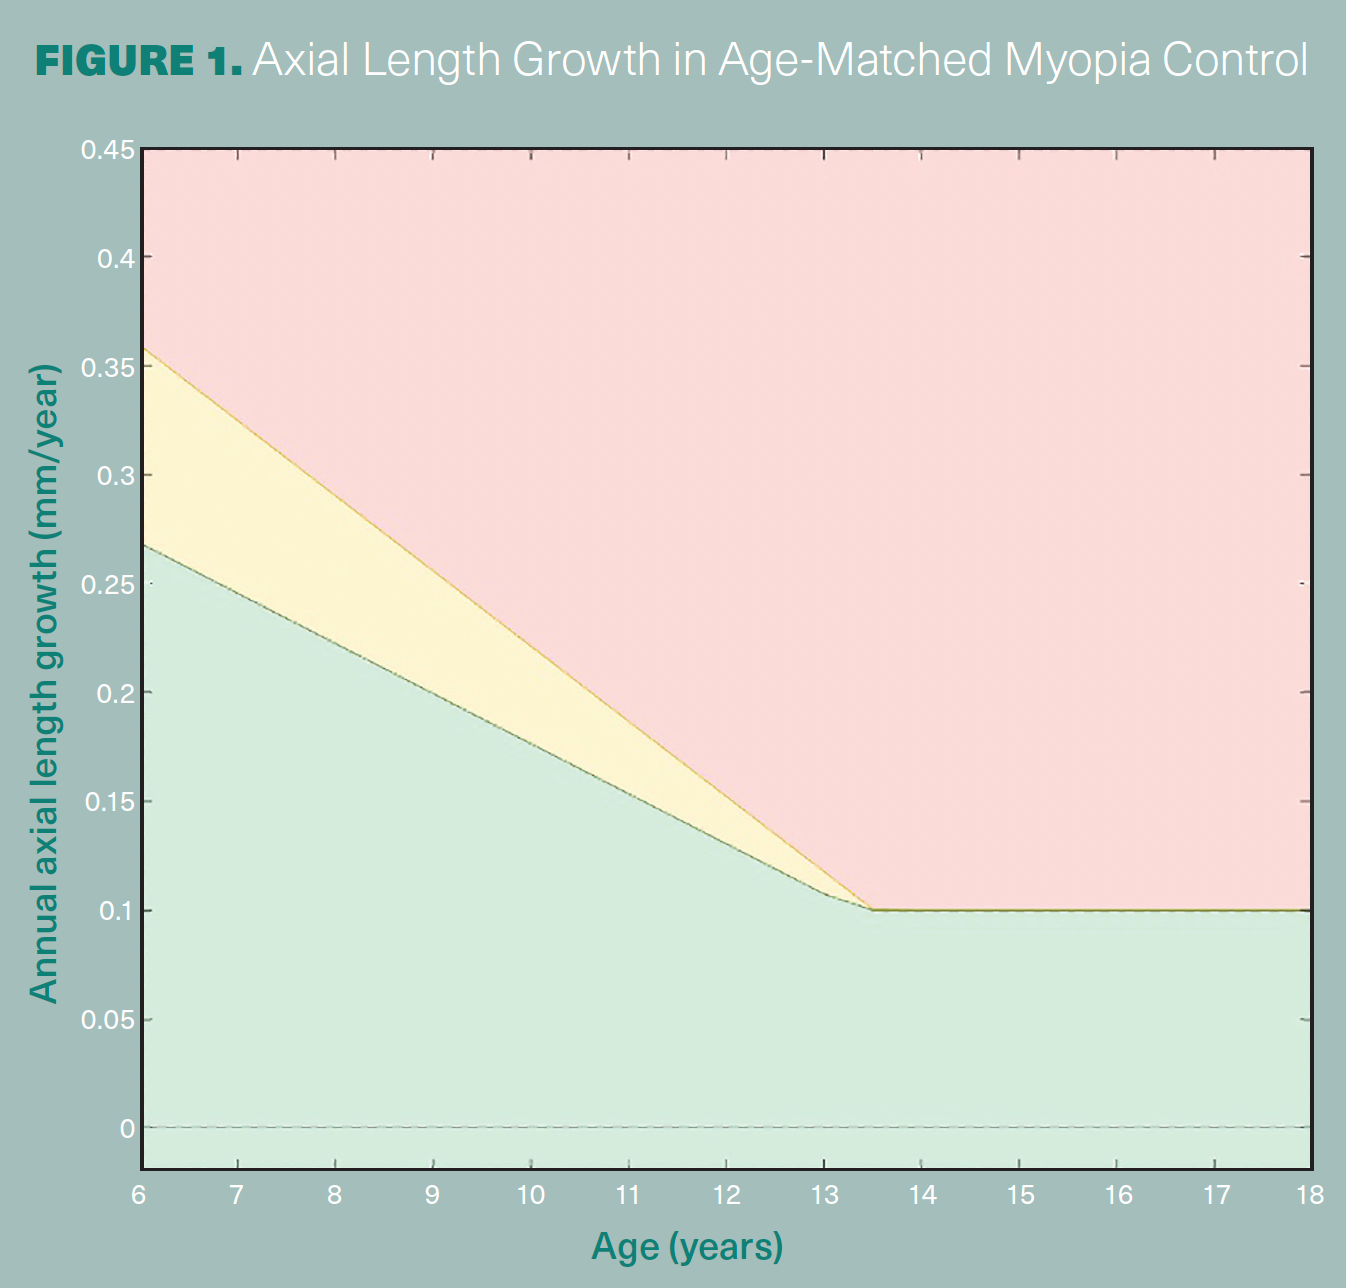 Figure 1. The image shows axial length growth in age-matched myopia control.